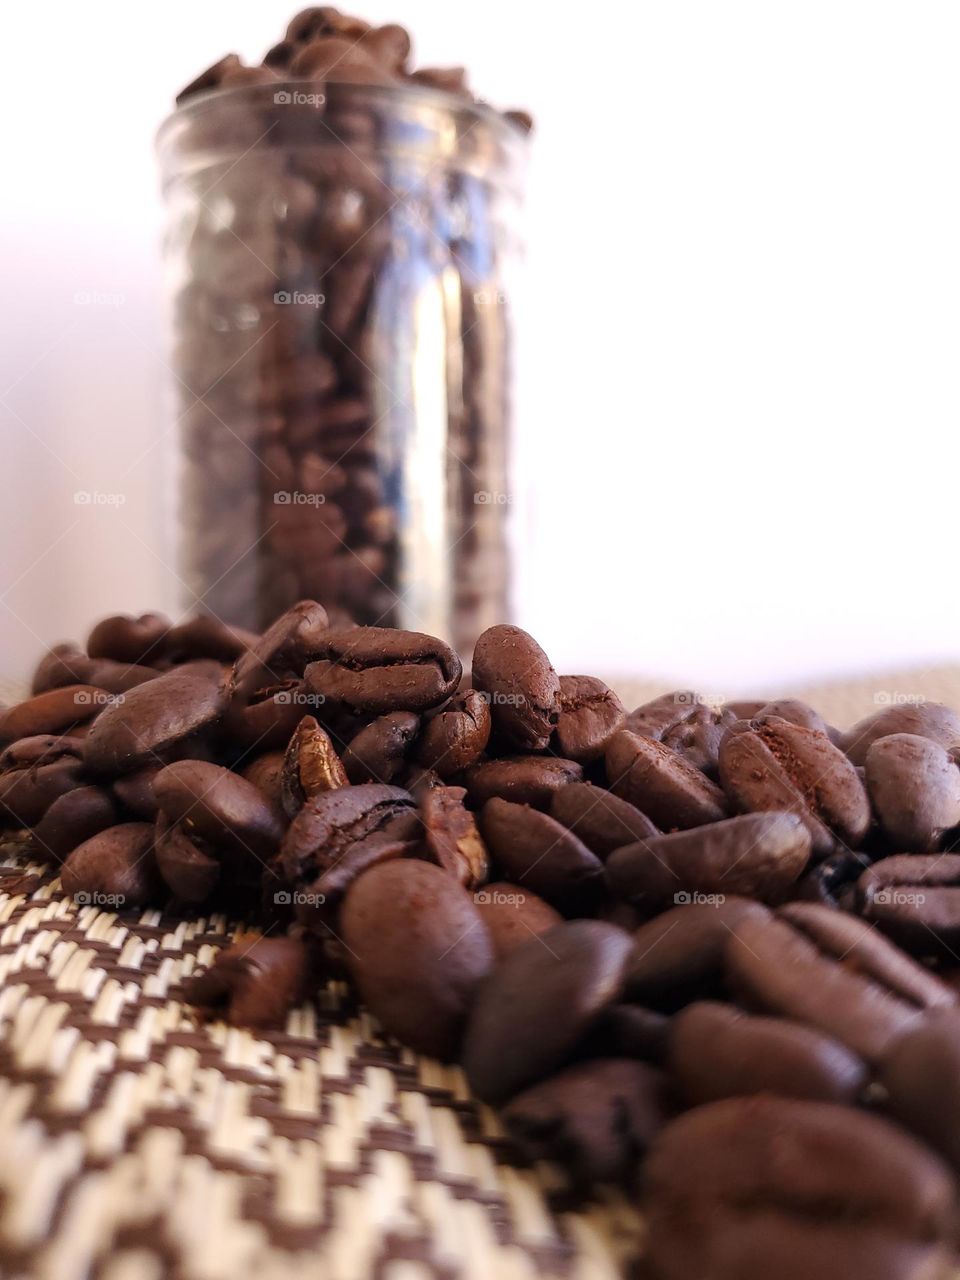 A clear glass jar of coffee beans in the background and spilled coffee beans directed towards the camera.